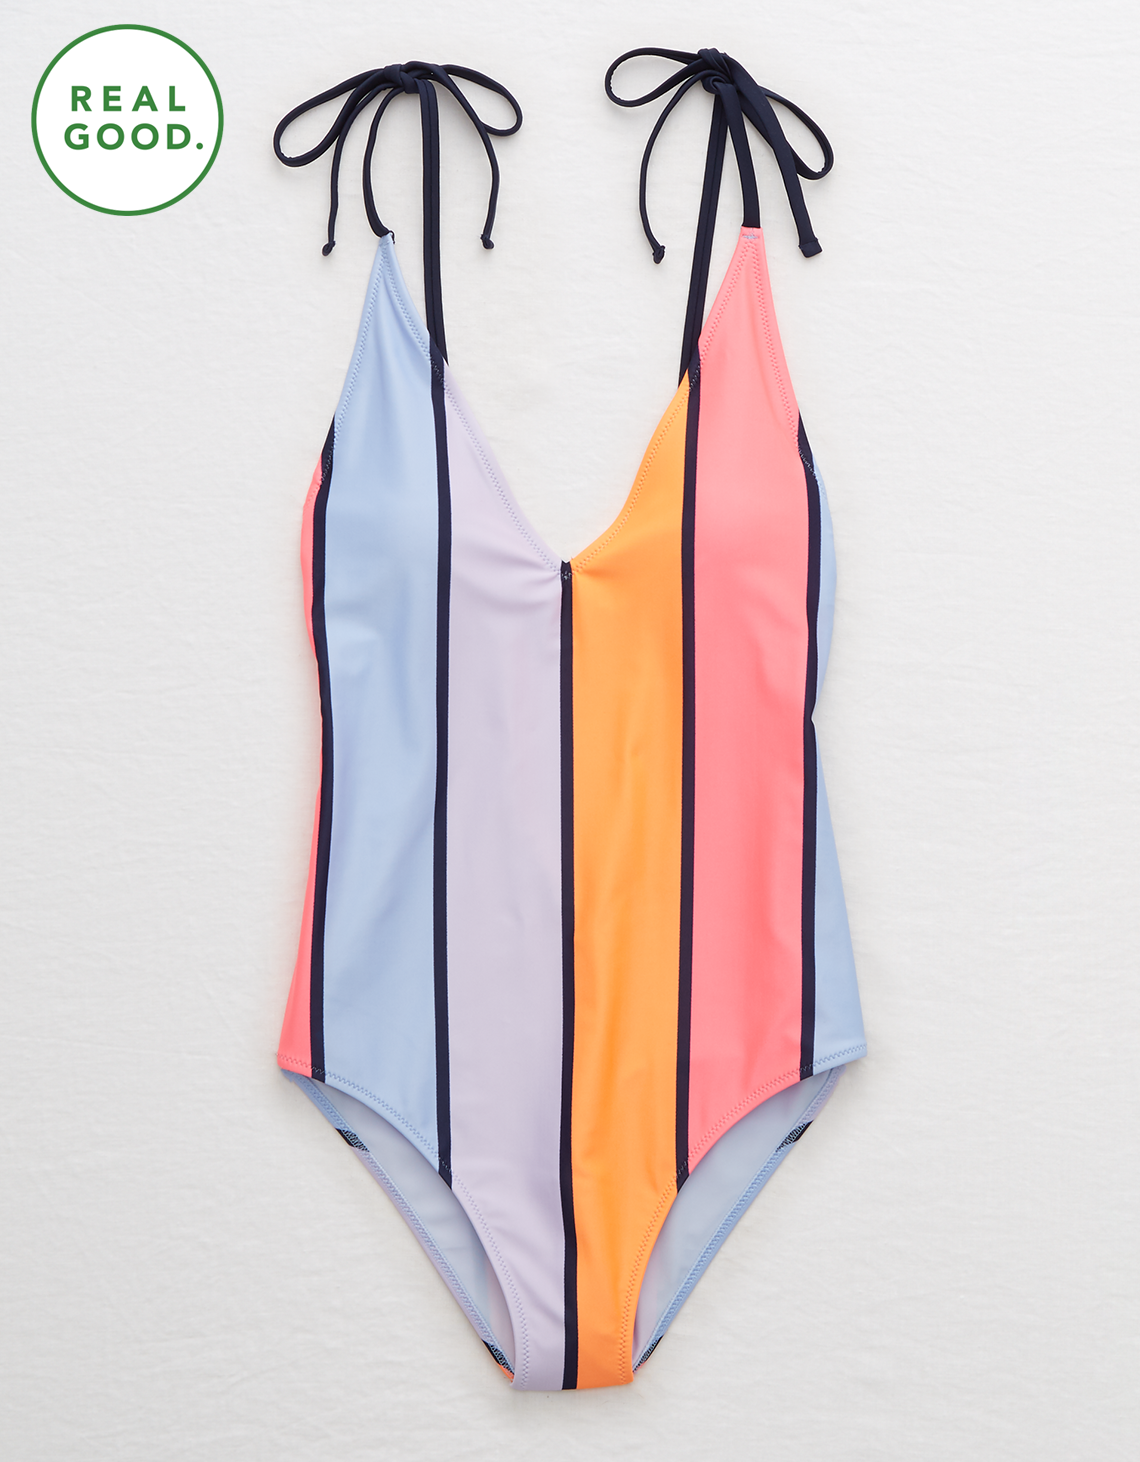 Aerie's Sustainable Swimsuits Made From Plastic Bottles